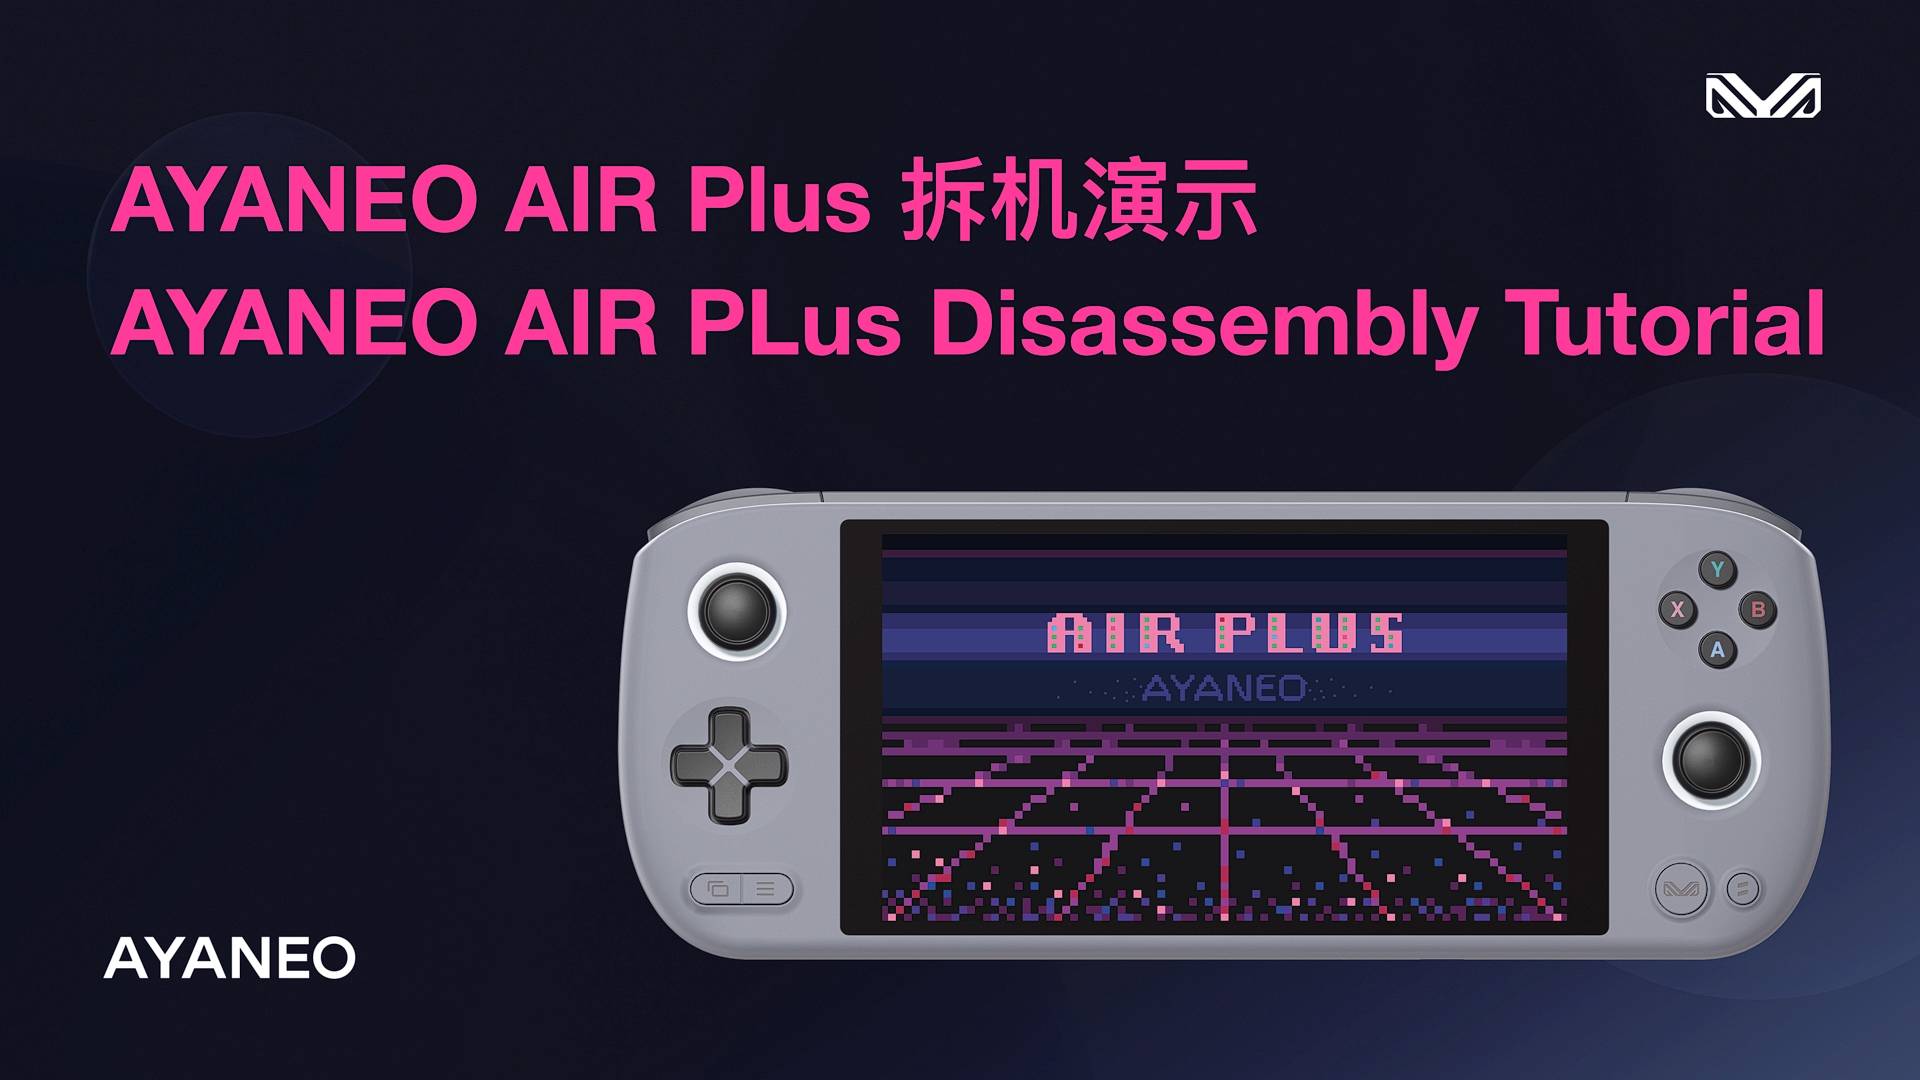 AYANEO AIR Plus Disassembly Tutorial